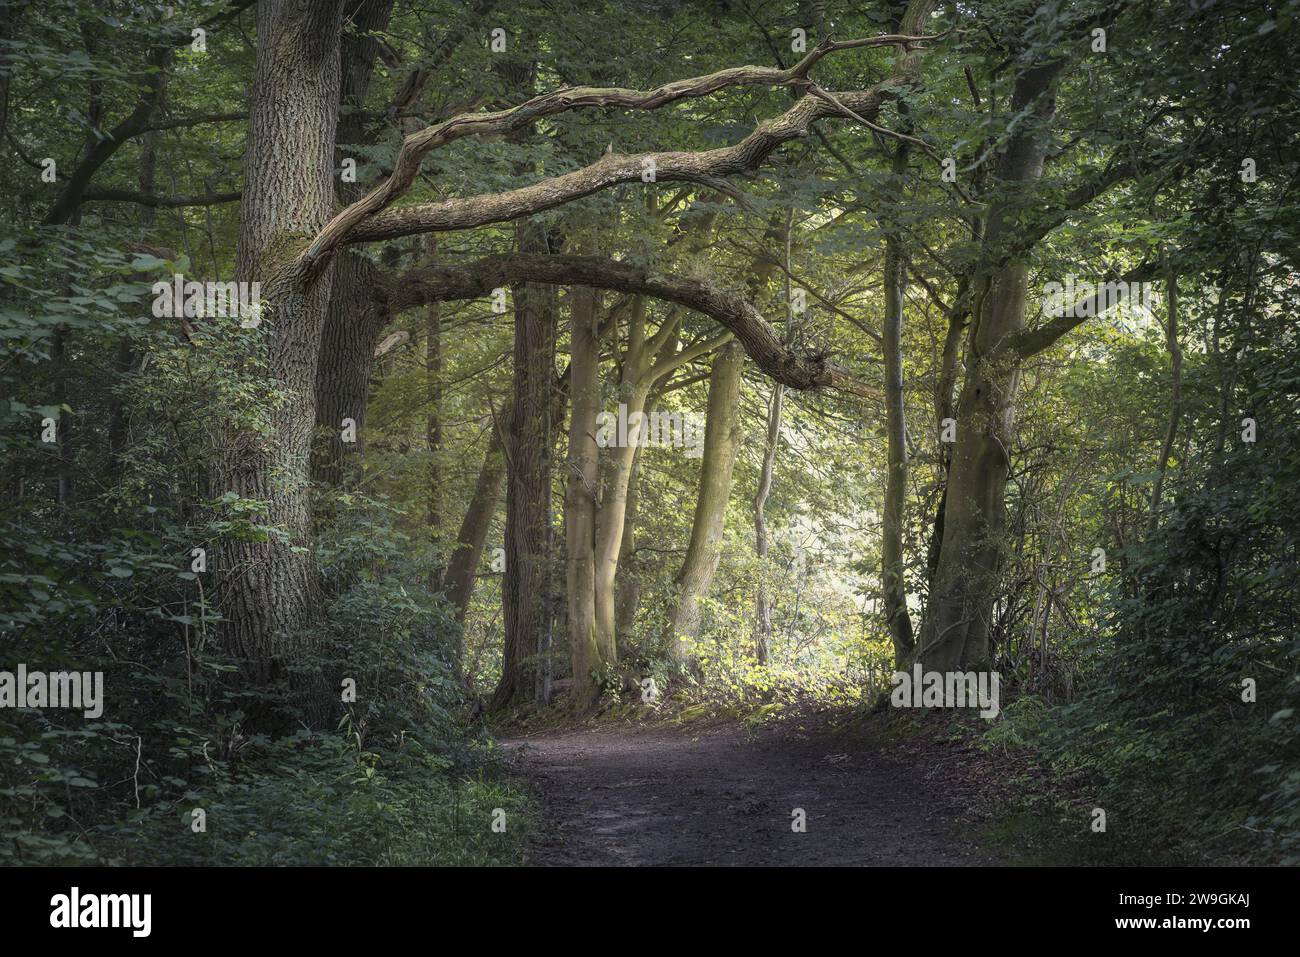 Tranquil forest grove with green leaves and old-growth trees, Grasten Forest, Denmark Stock Photo